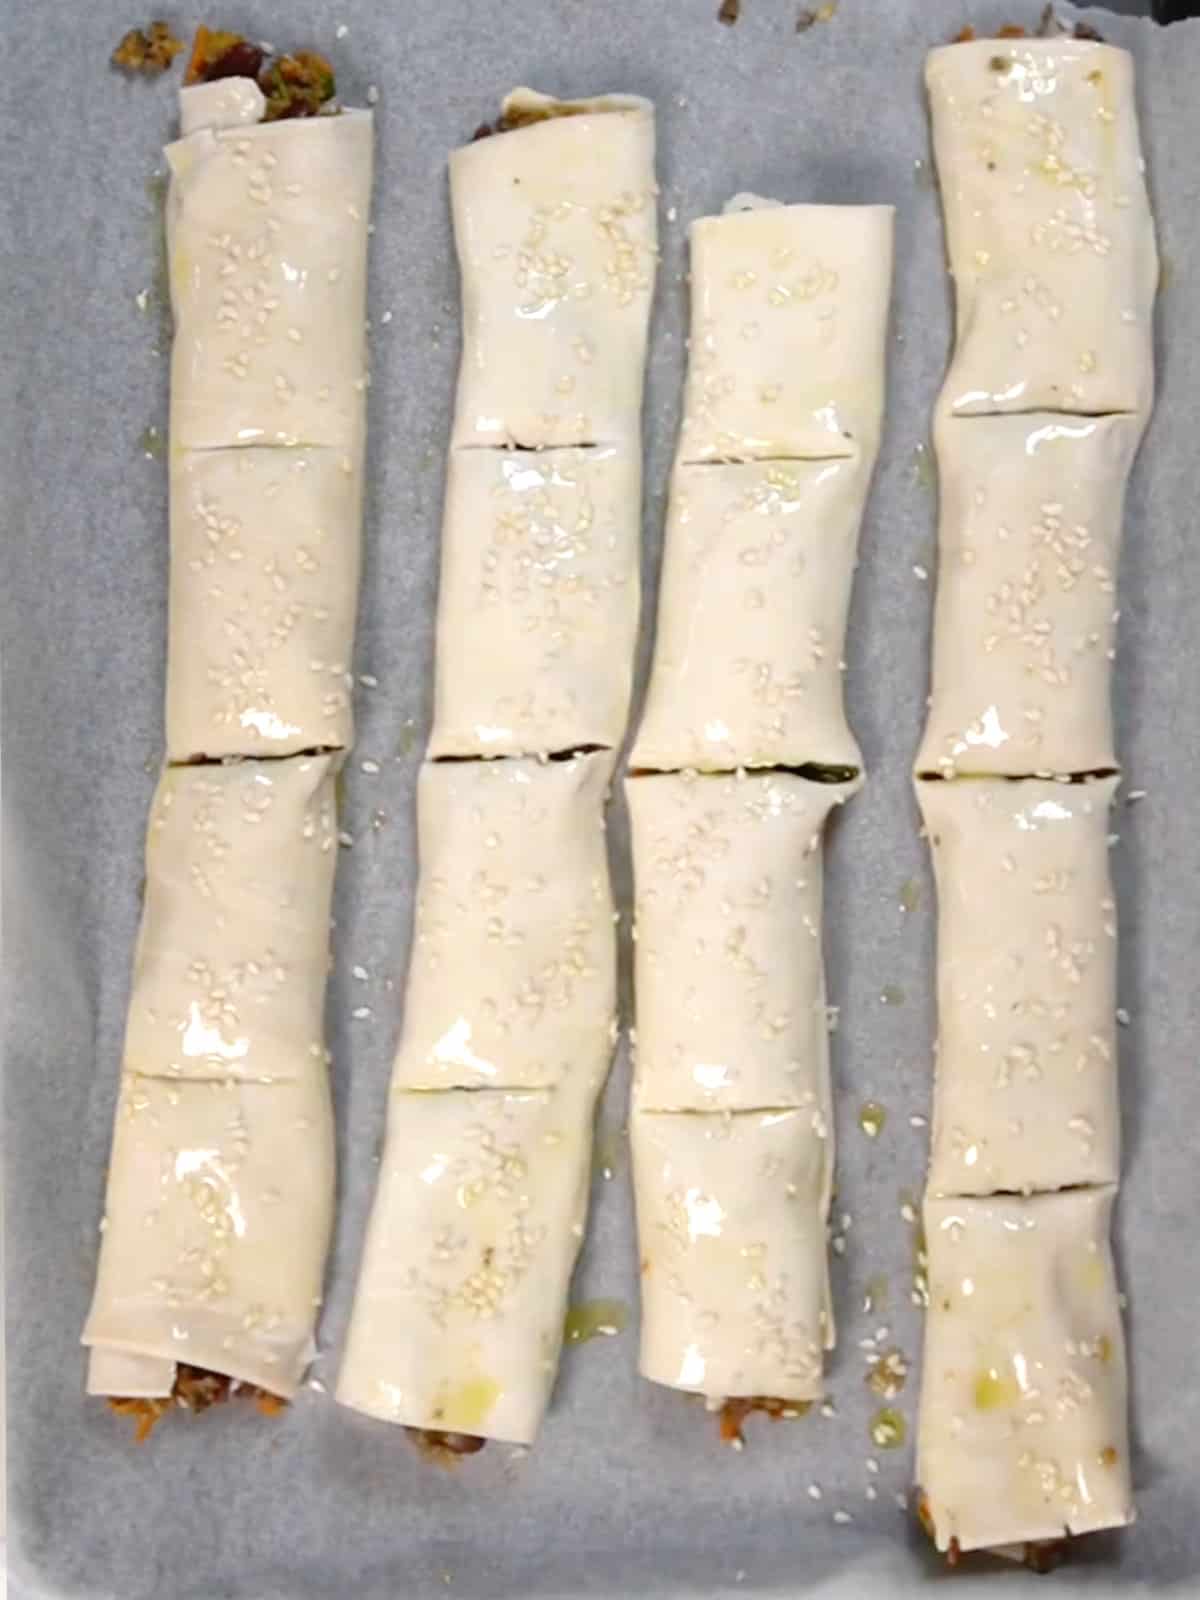 uncooked vegetable sausage rolls on a paper lined tray